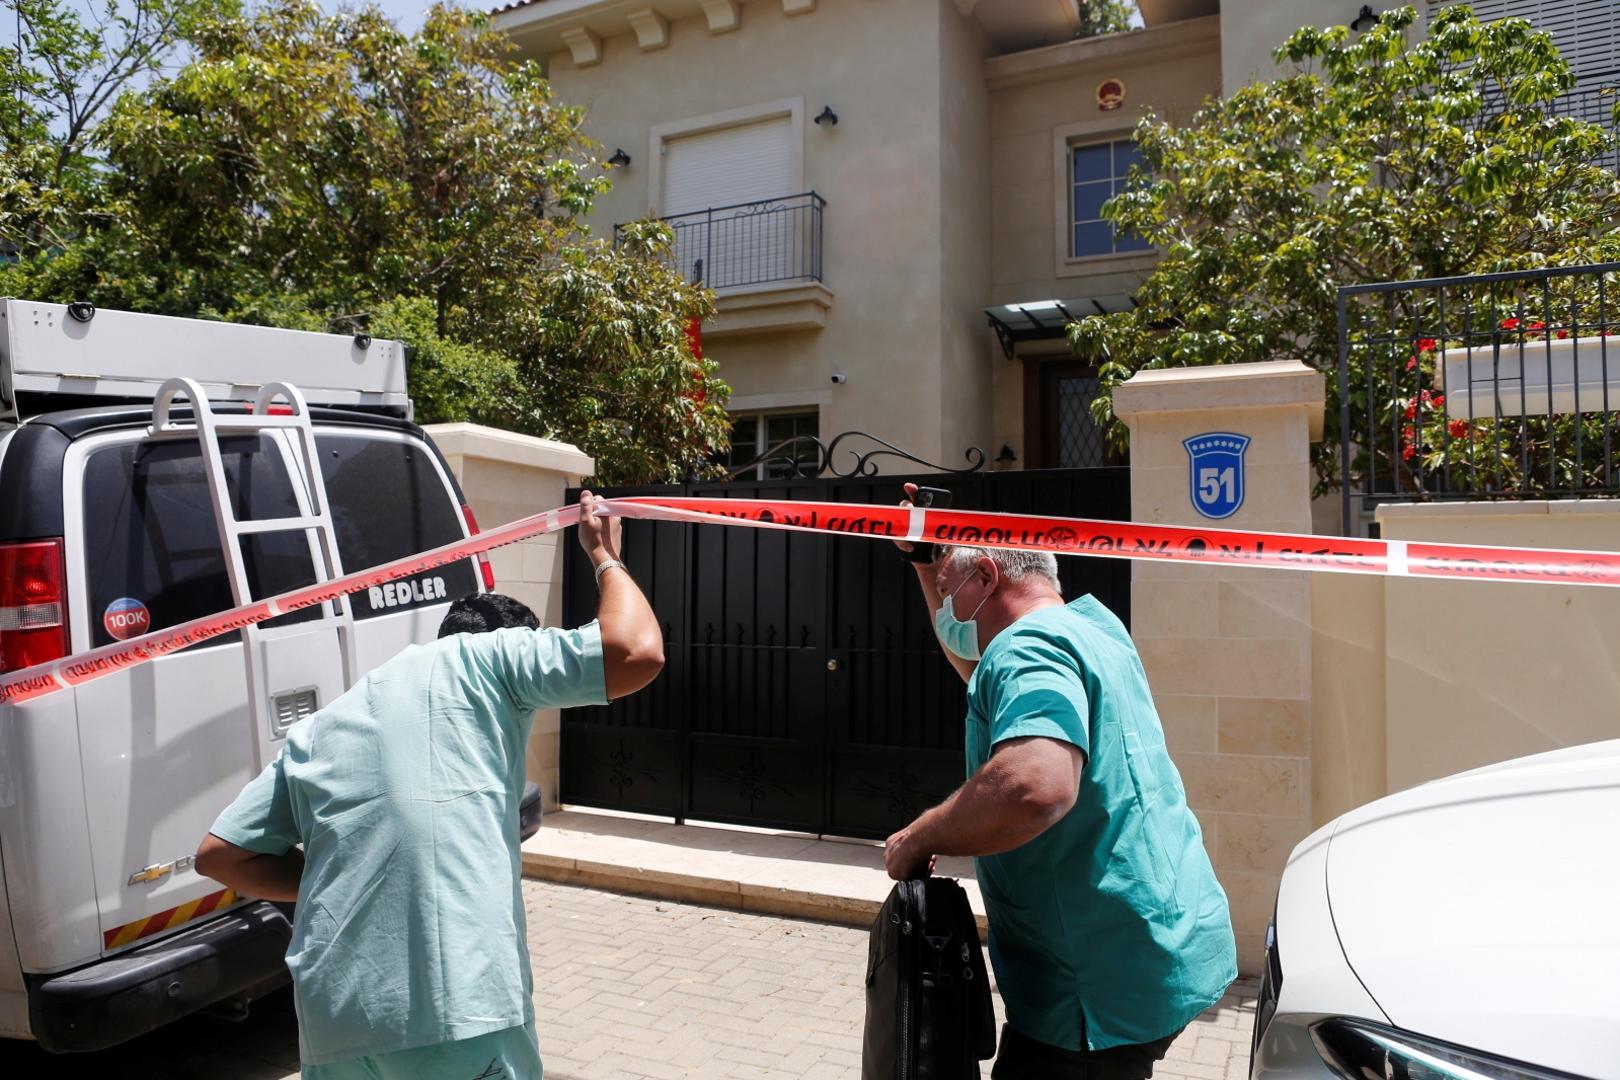 Doctor Chen Kugel, head of Israel National Center of Forensic Medicine and his colleague, pass through a police cordon as they enter China's ambassador to Israel, Du Wei's house in Herzliya, near Tel Aviv, Israel Doctor Chen Kugel, head of Israel National Center of Forensic Medicine and his colleague, pass through a police cordon as they enter China's ambassador to Israel, Du Wei's house in Herzliya, near Tel Aviv, Israel May 17, 2020. REUTERS/Nir Elias NIR ELIAS